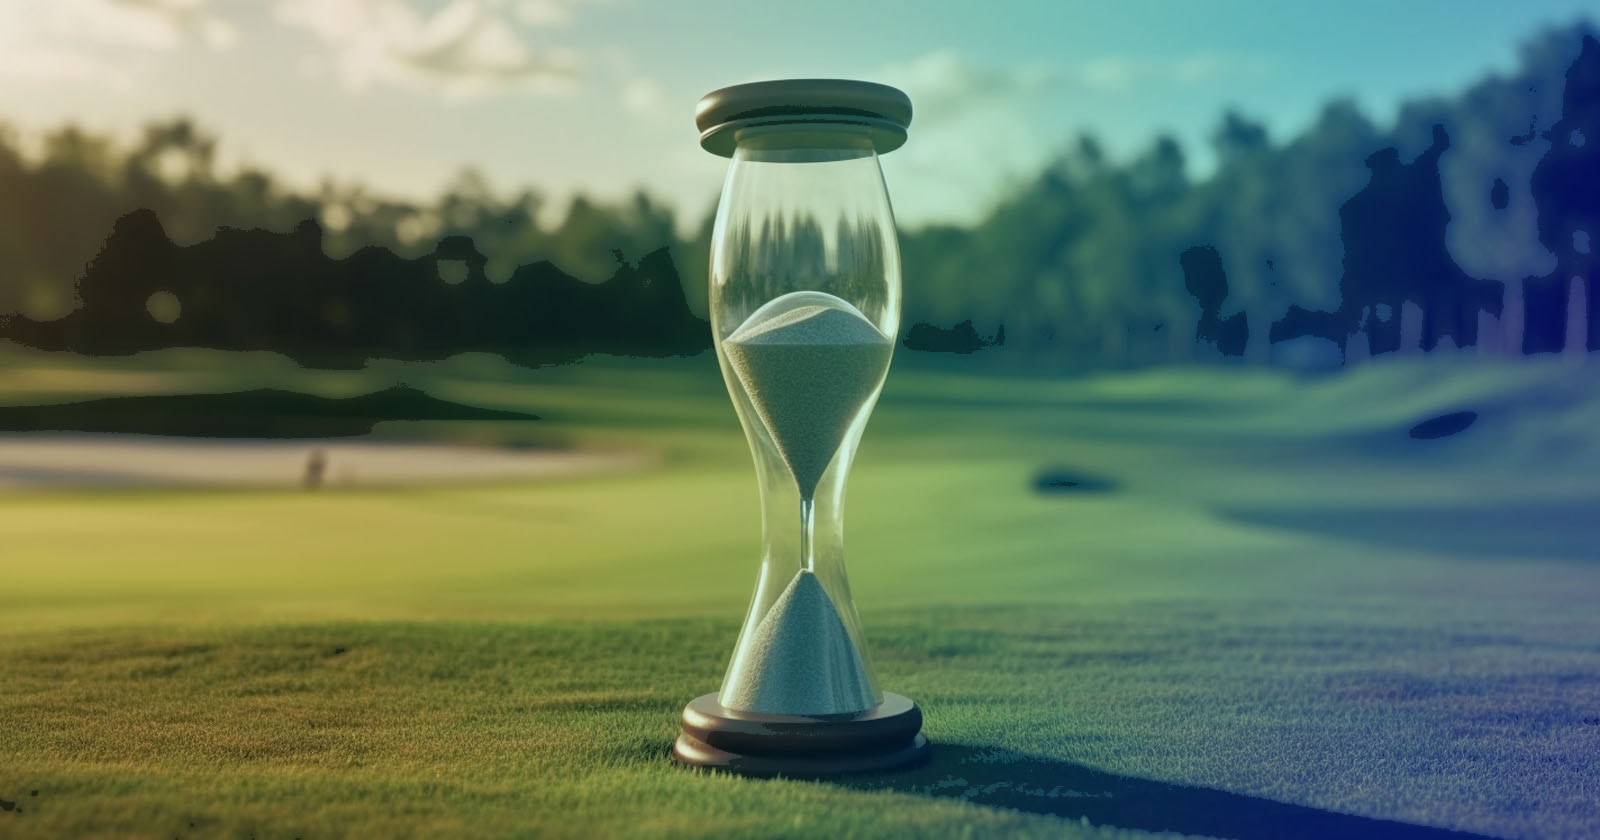 How long does golf take